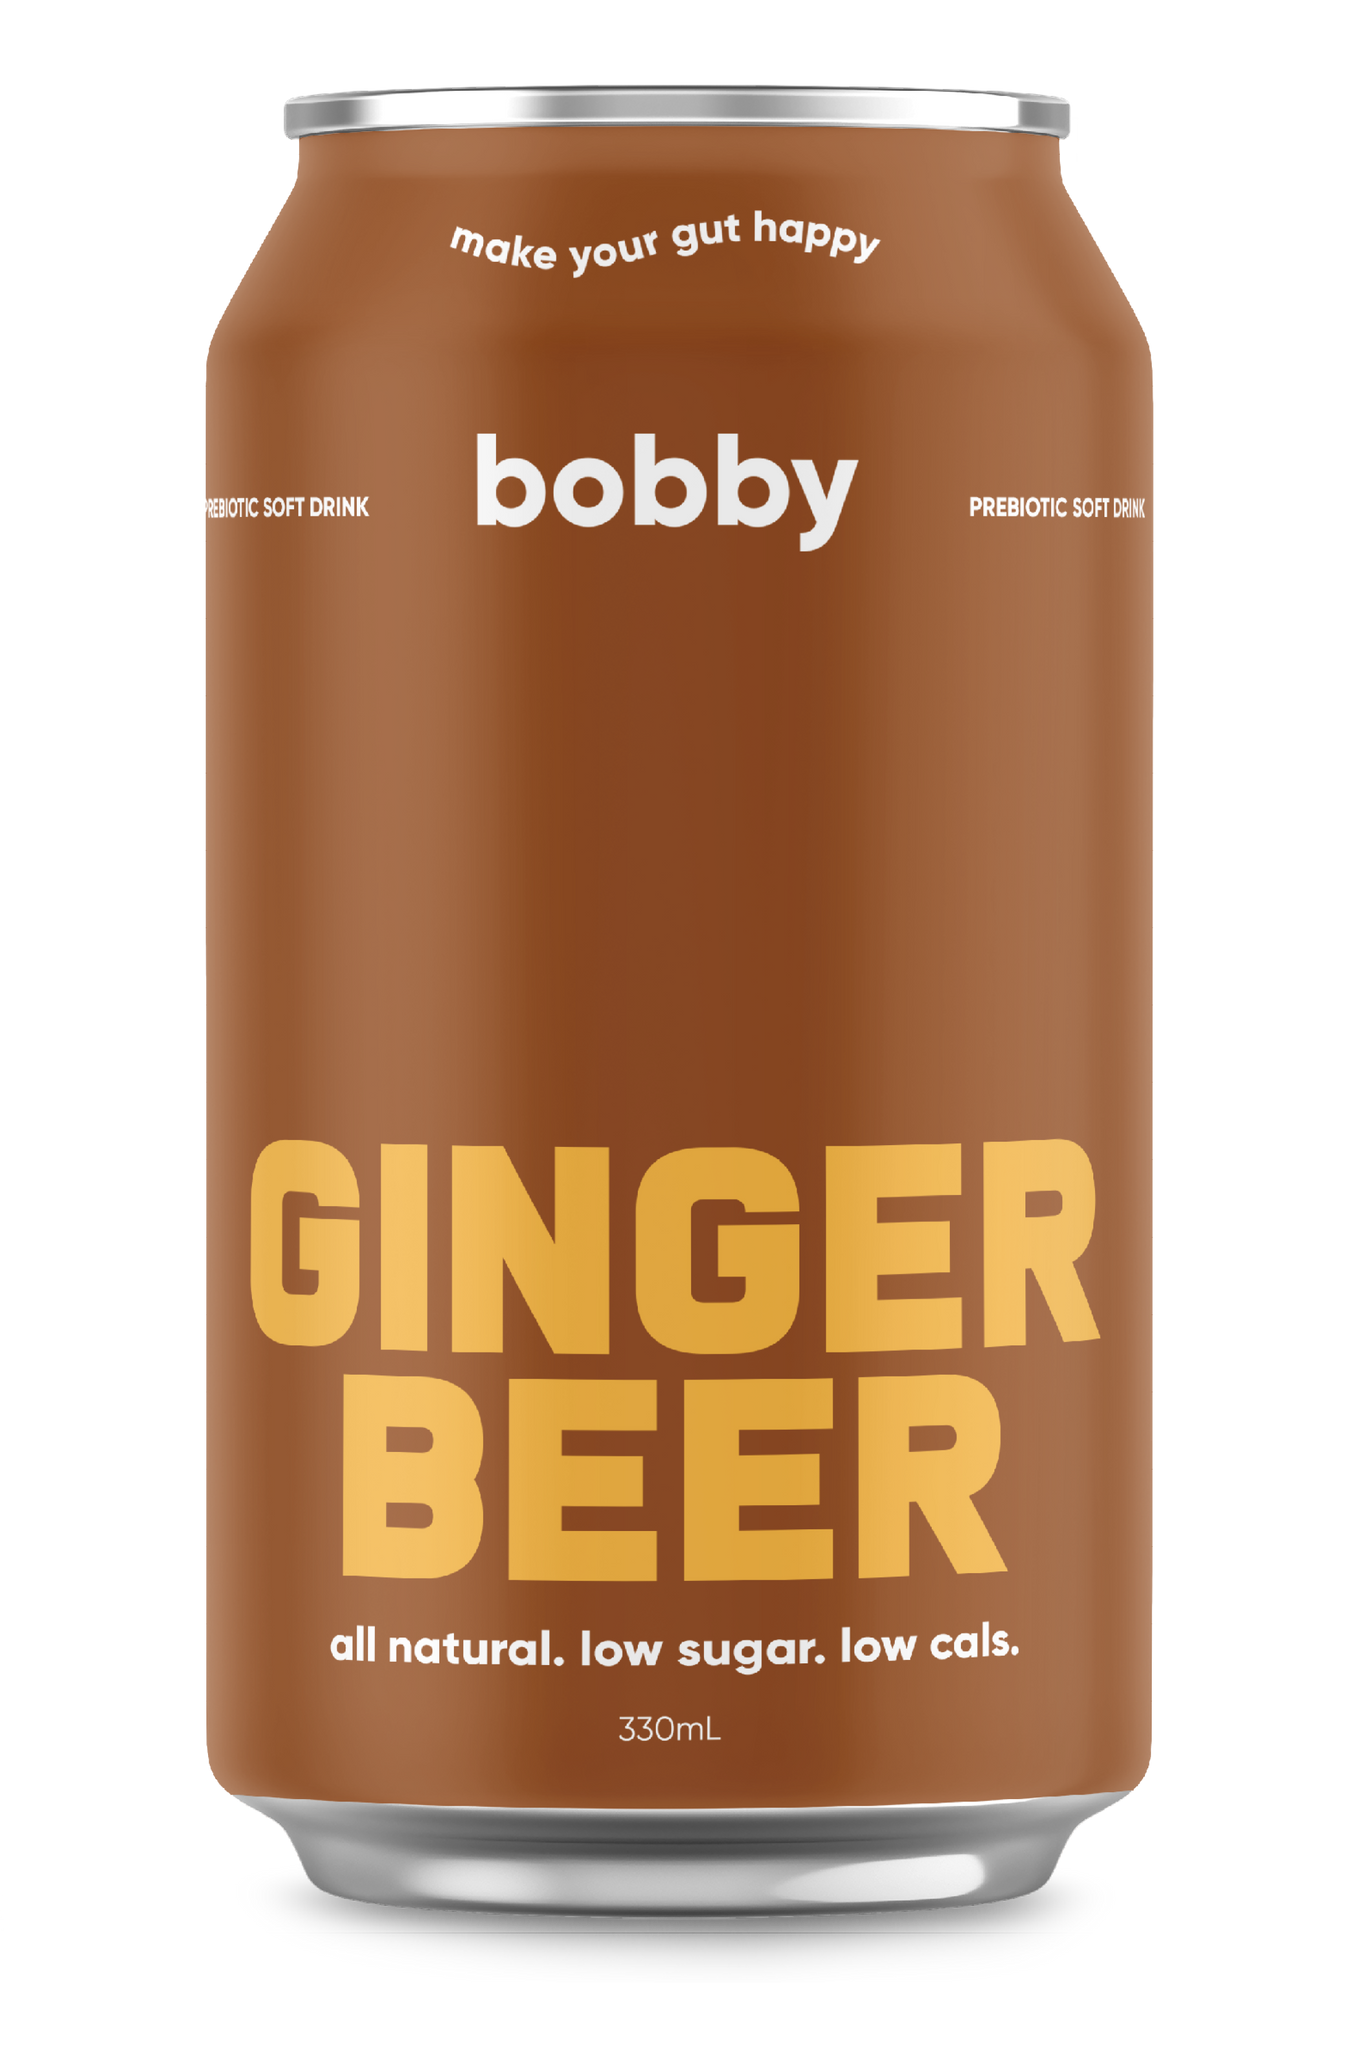 ginger beer soda with added prebiotics low sugar low calorie and all natural.  A soda with prebiotics proven to aid in digestion. Think Bundaberg, but better